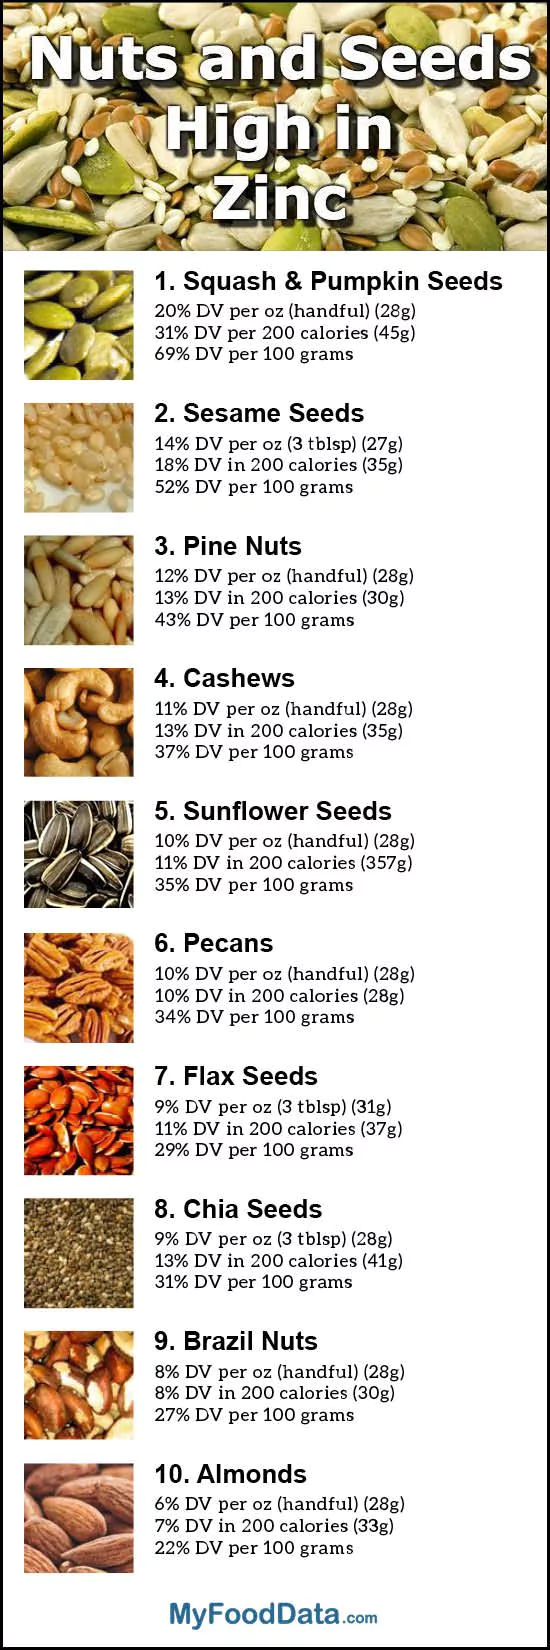 Top 10 Nuts and Seeds Highest in Zinc